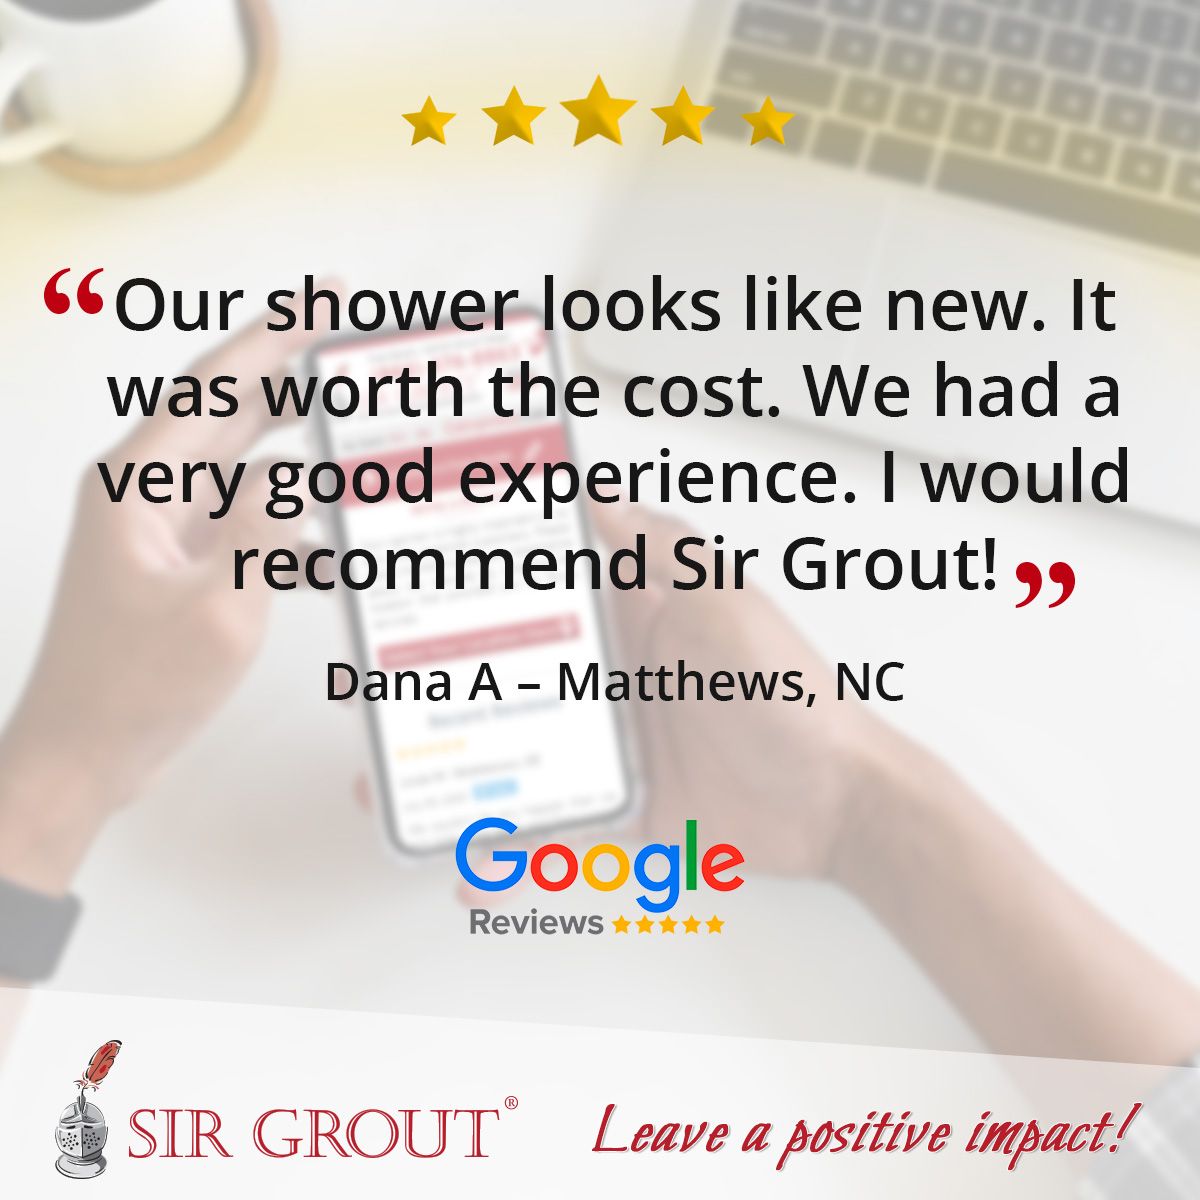 Our shower looks like new. It was worth the cost. We had a very good experience. I would recommend Sir Grout!